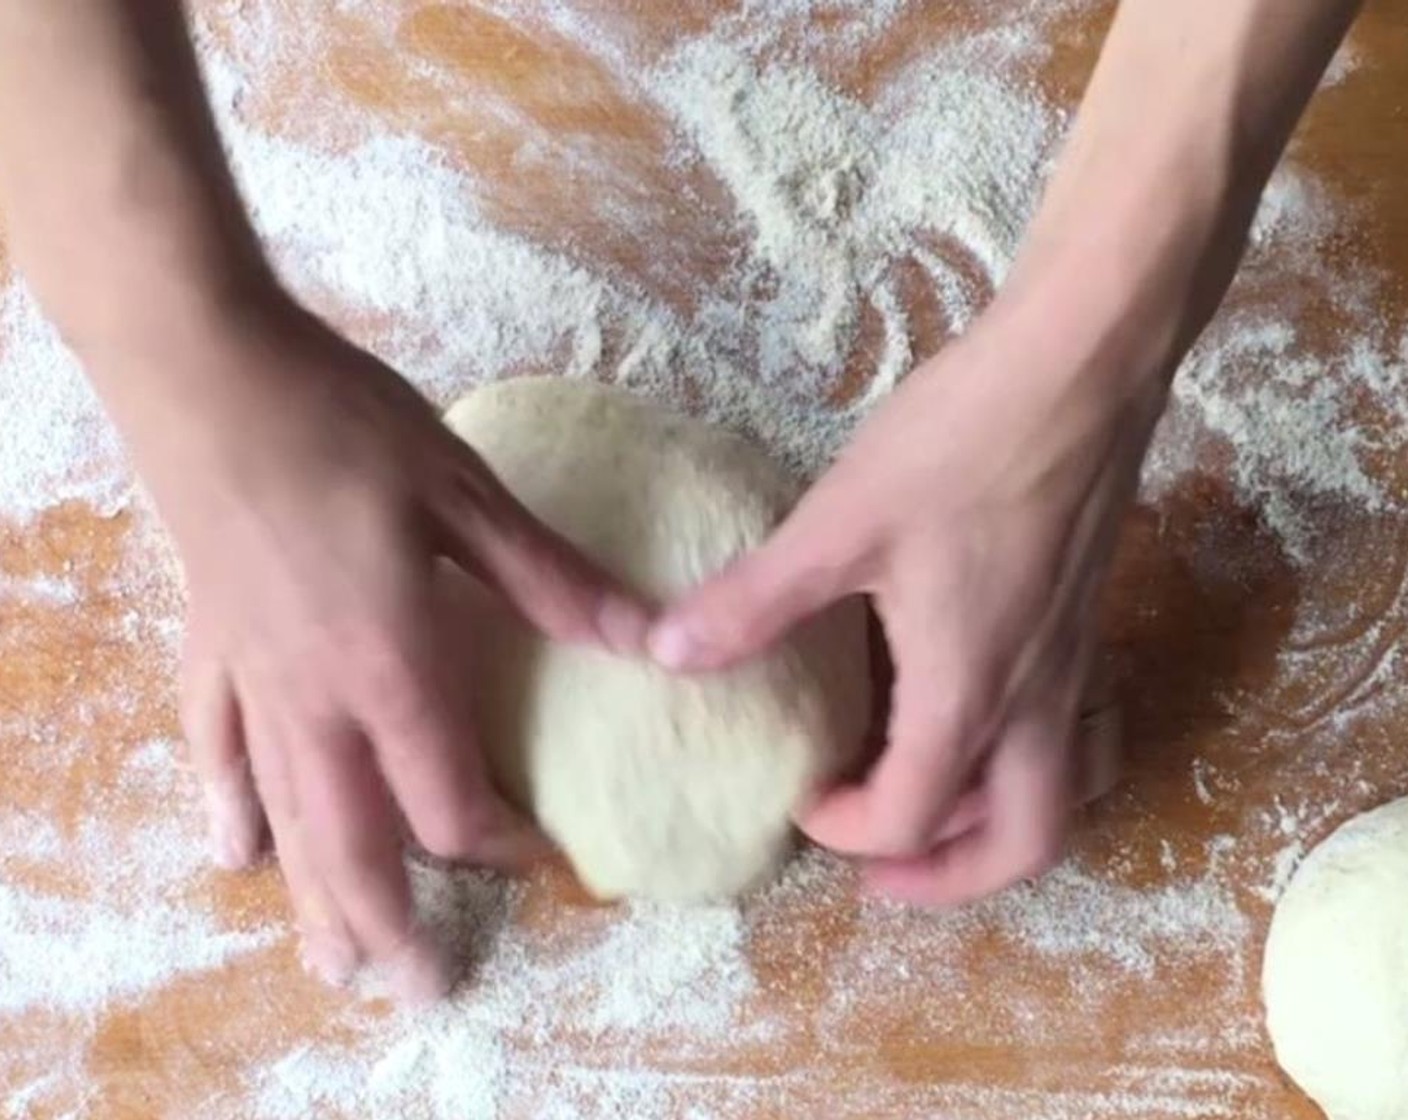 step 5 Let dough rest, covered with plastic wrap or a damp kitchen towel, until soft and pliable, about 1 hour. Proceed with recipe or transfer each to a plastic quart container, cover, and store in fridge, or wrap each dough ball separately in plastic wrap and store in fridge.